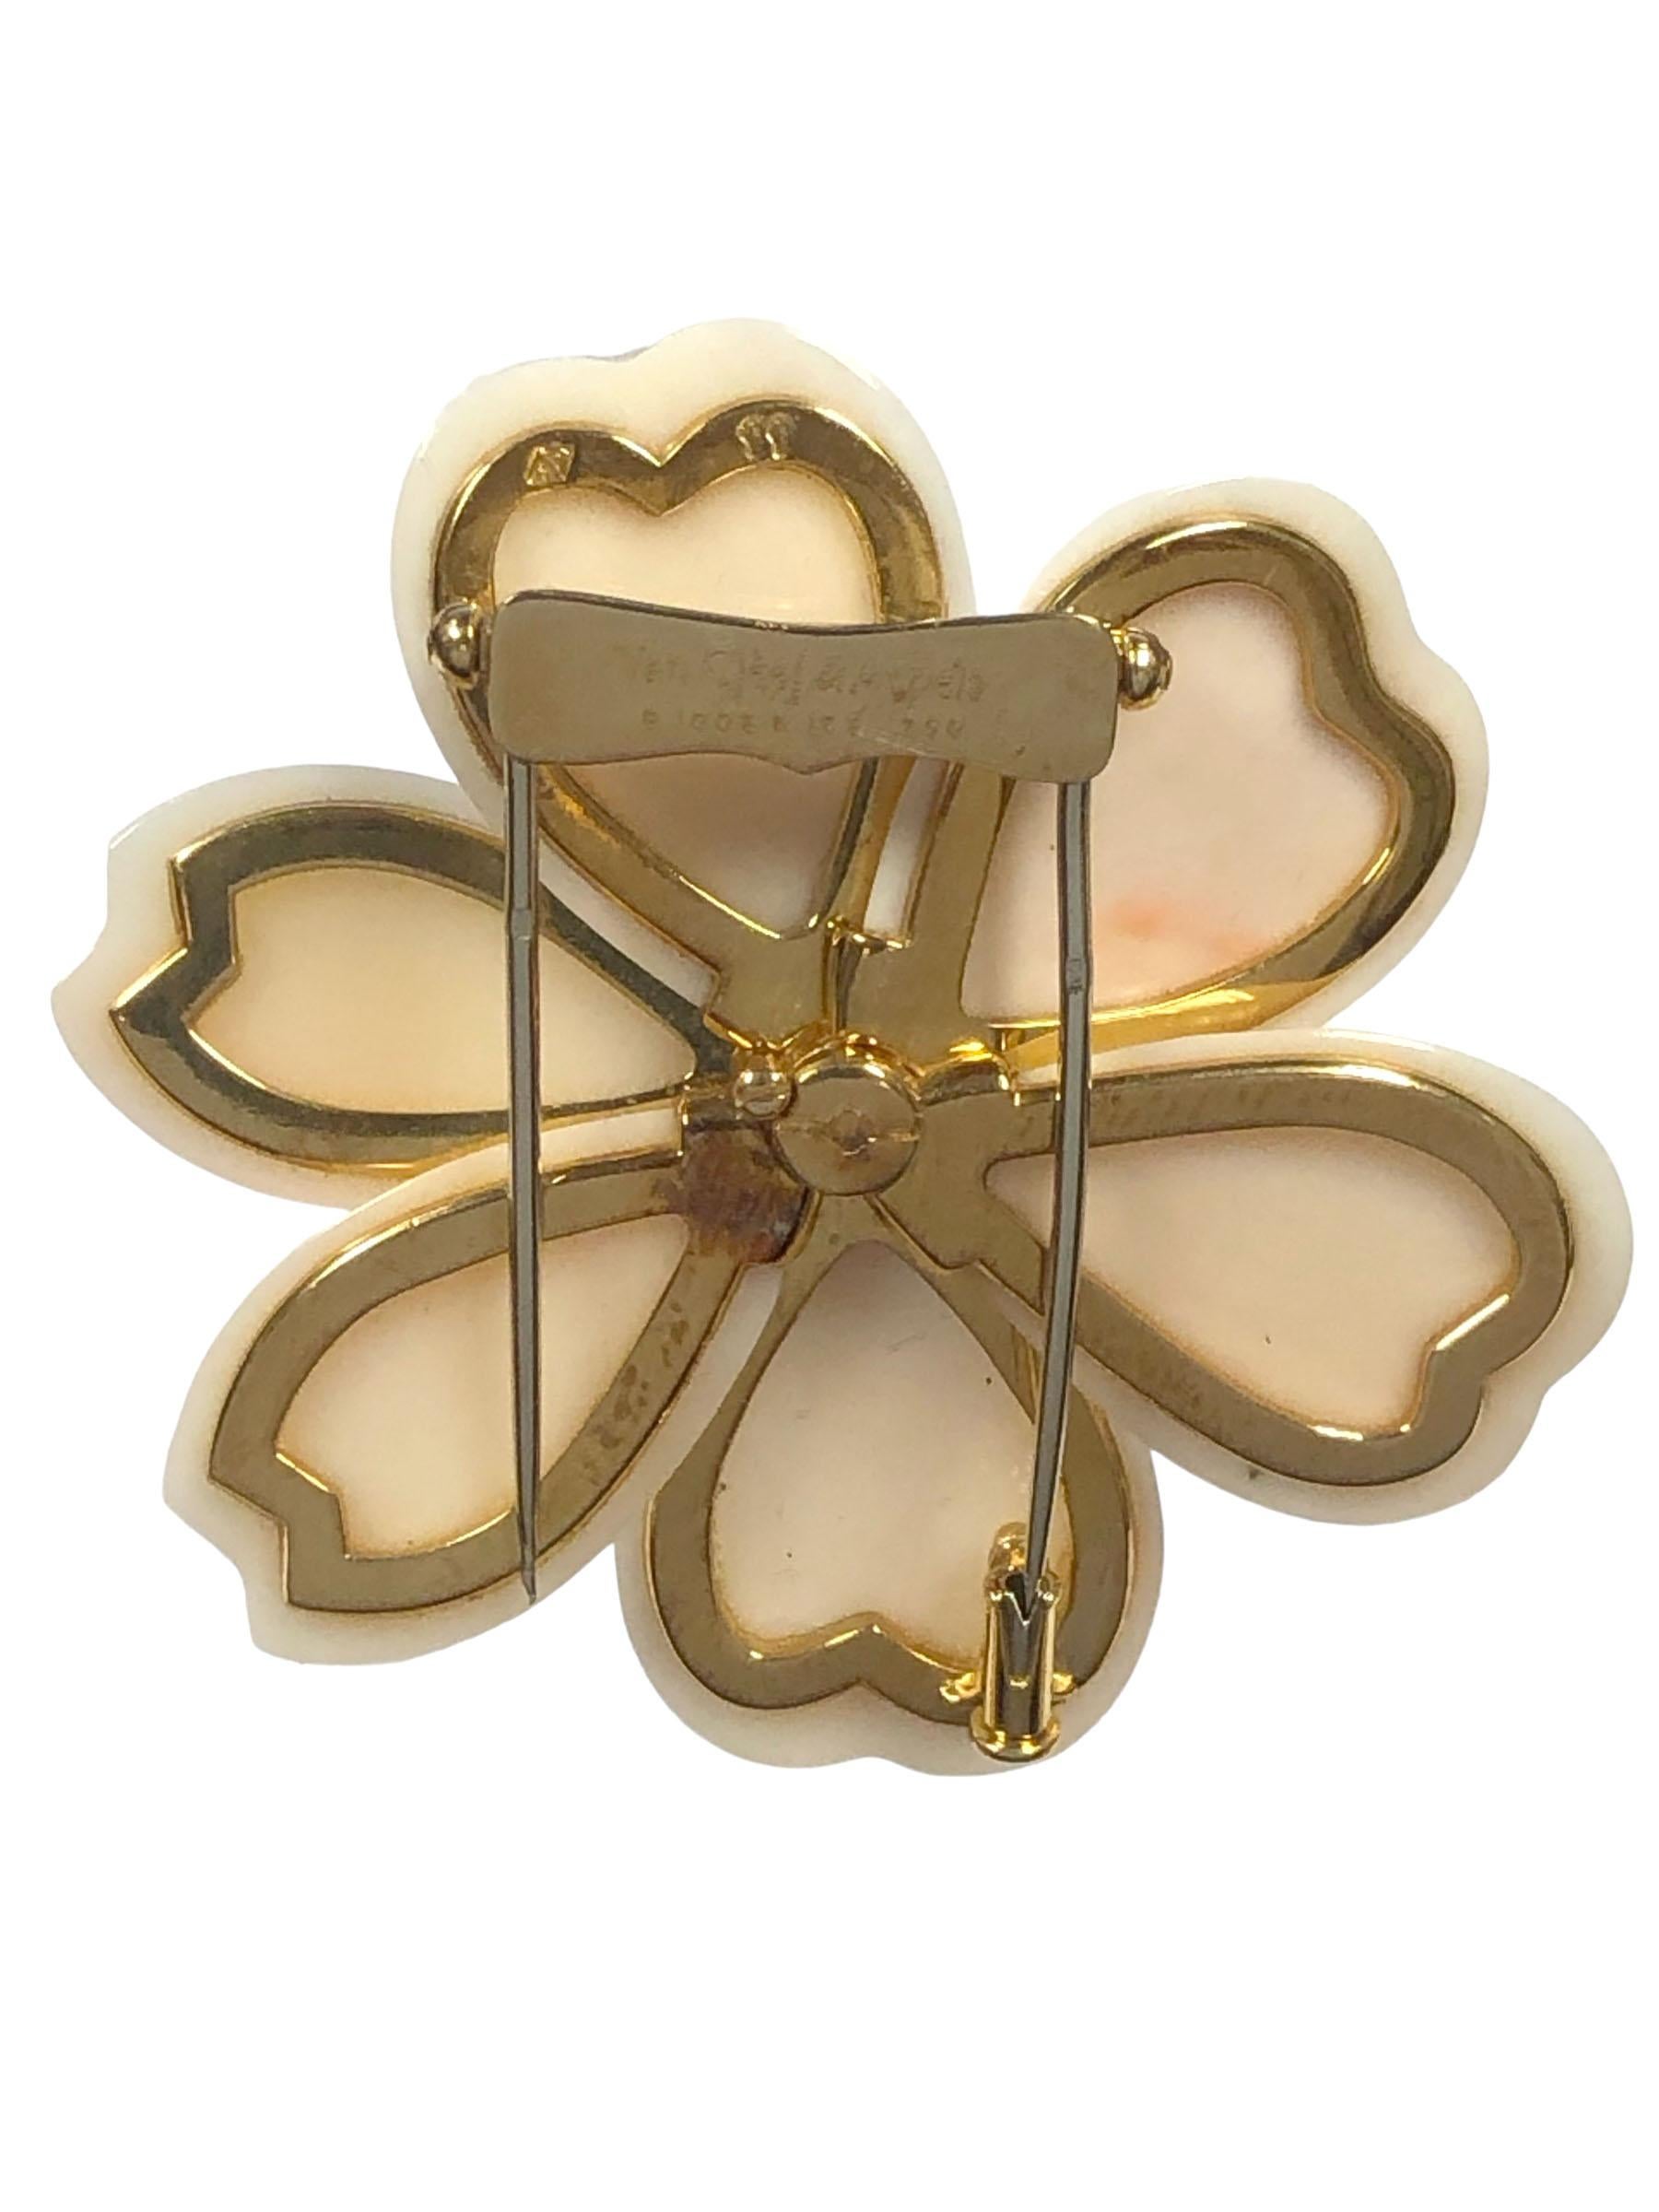 Van Cleef & Arpels Rose de Noel Collection clip Brooch, measuring 2 inches in Diameter, comprised of 6 Light Pink Coral Pedals with an 18k Yellow Gold center set with 7 Round Brilliant cut Diamonds totaling .80 Carat. having a double clip - pin